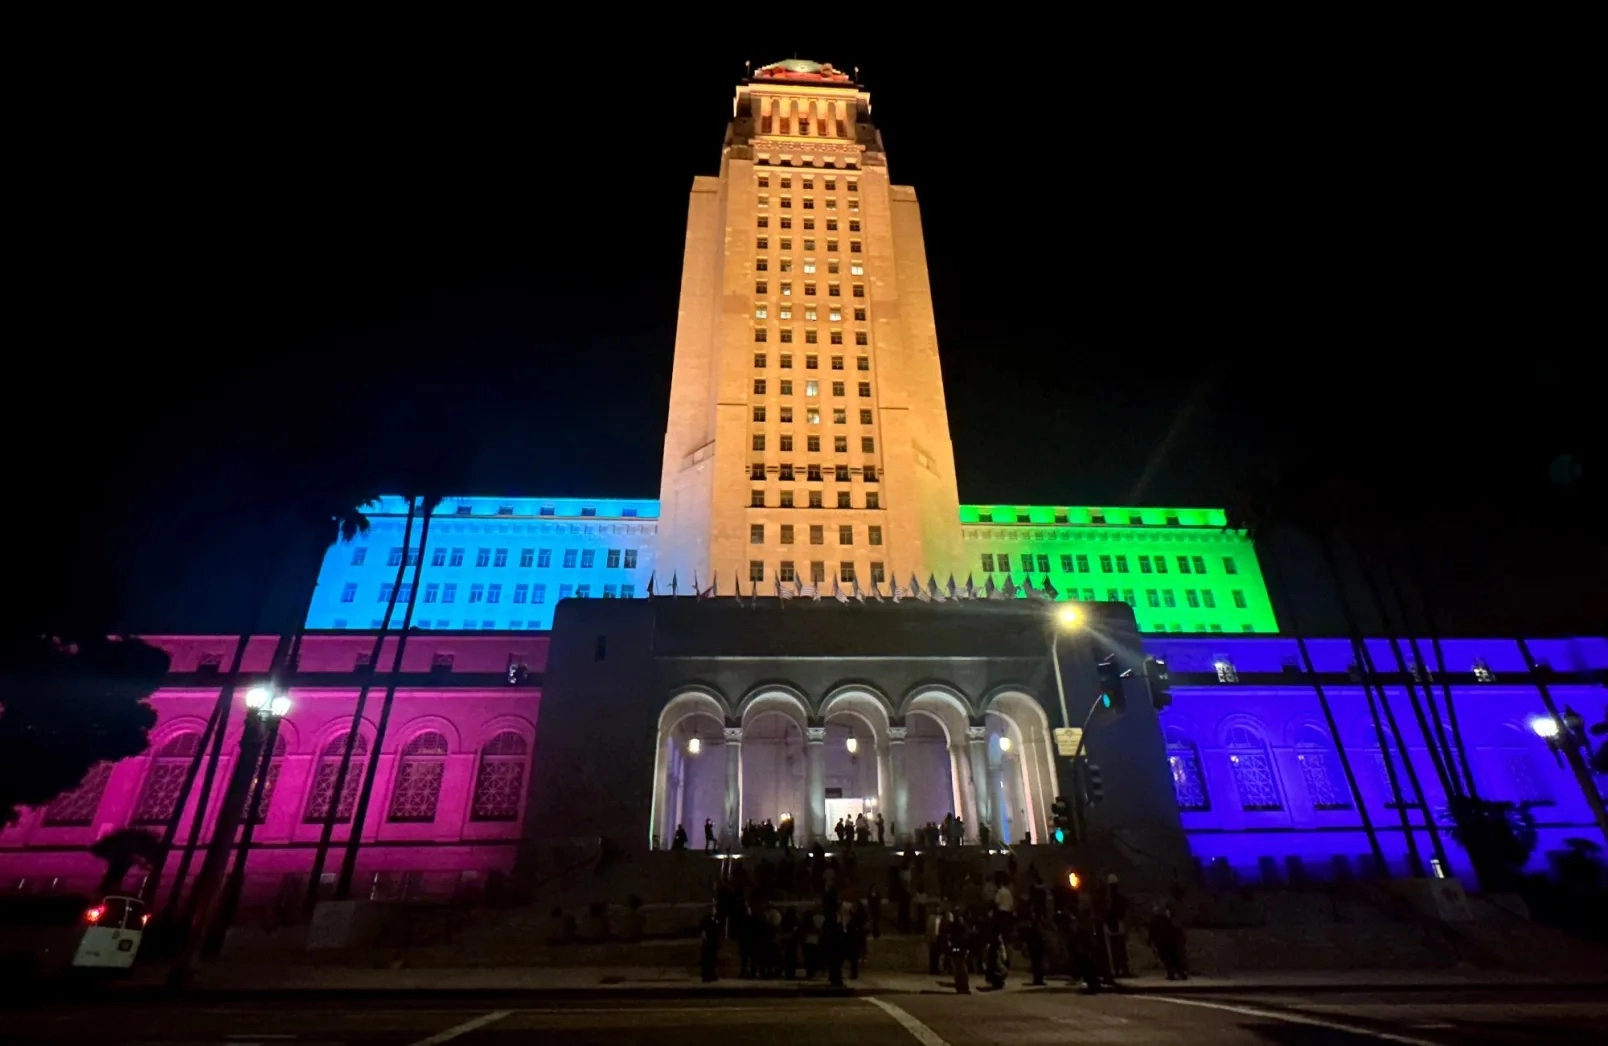 LA City Hall lit up in LA for All Colors